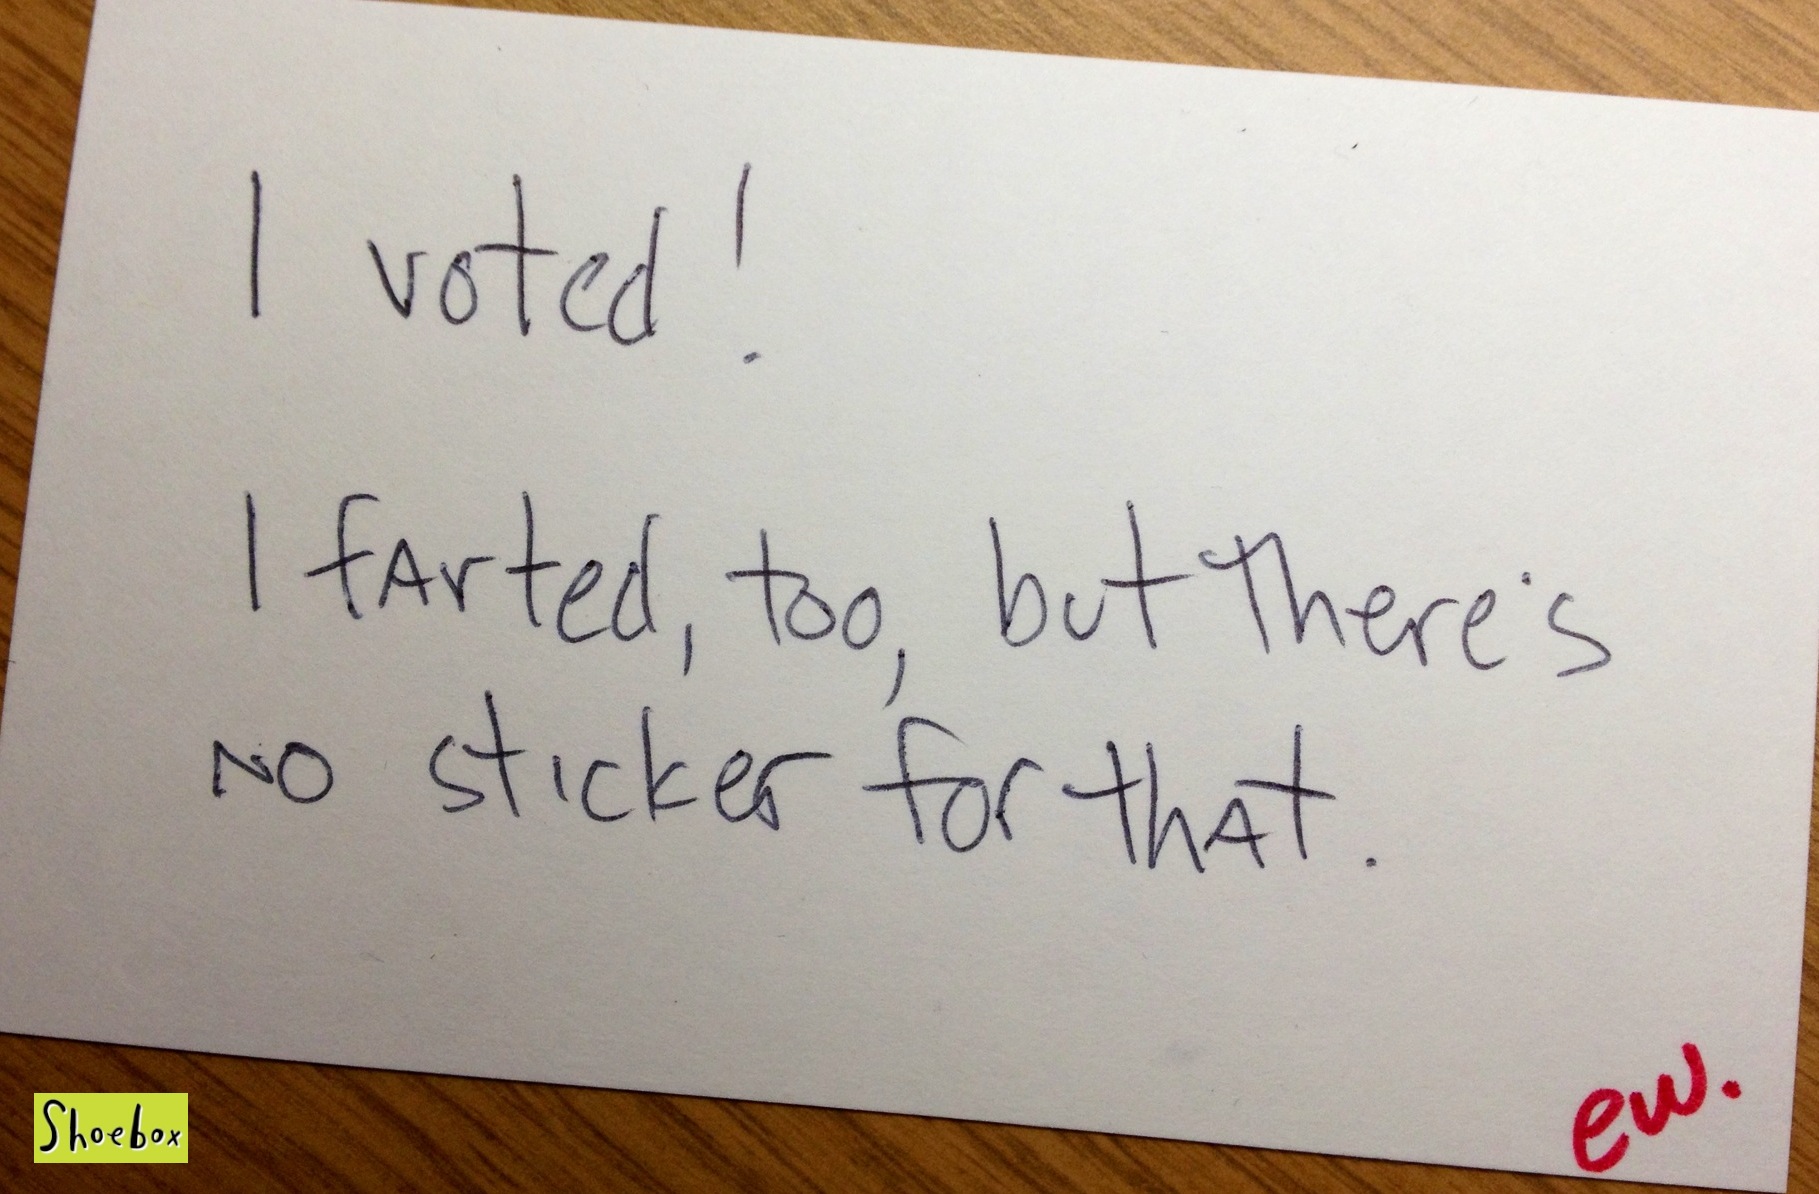 handwriting - I voted! I farted, too, but there's Ho sticker for that. ew.